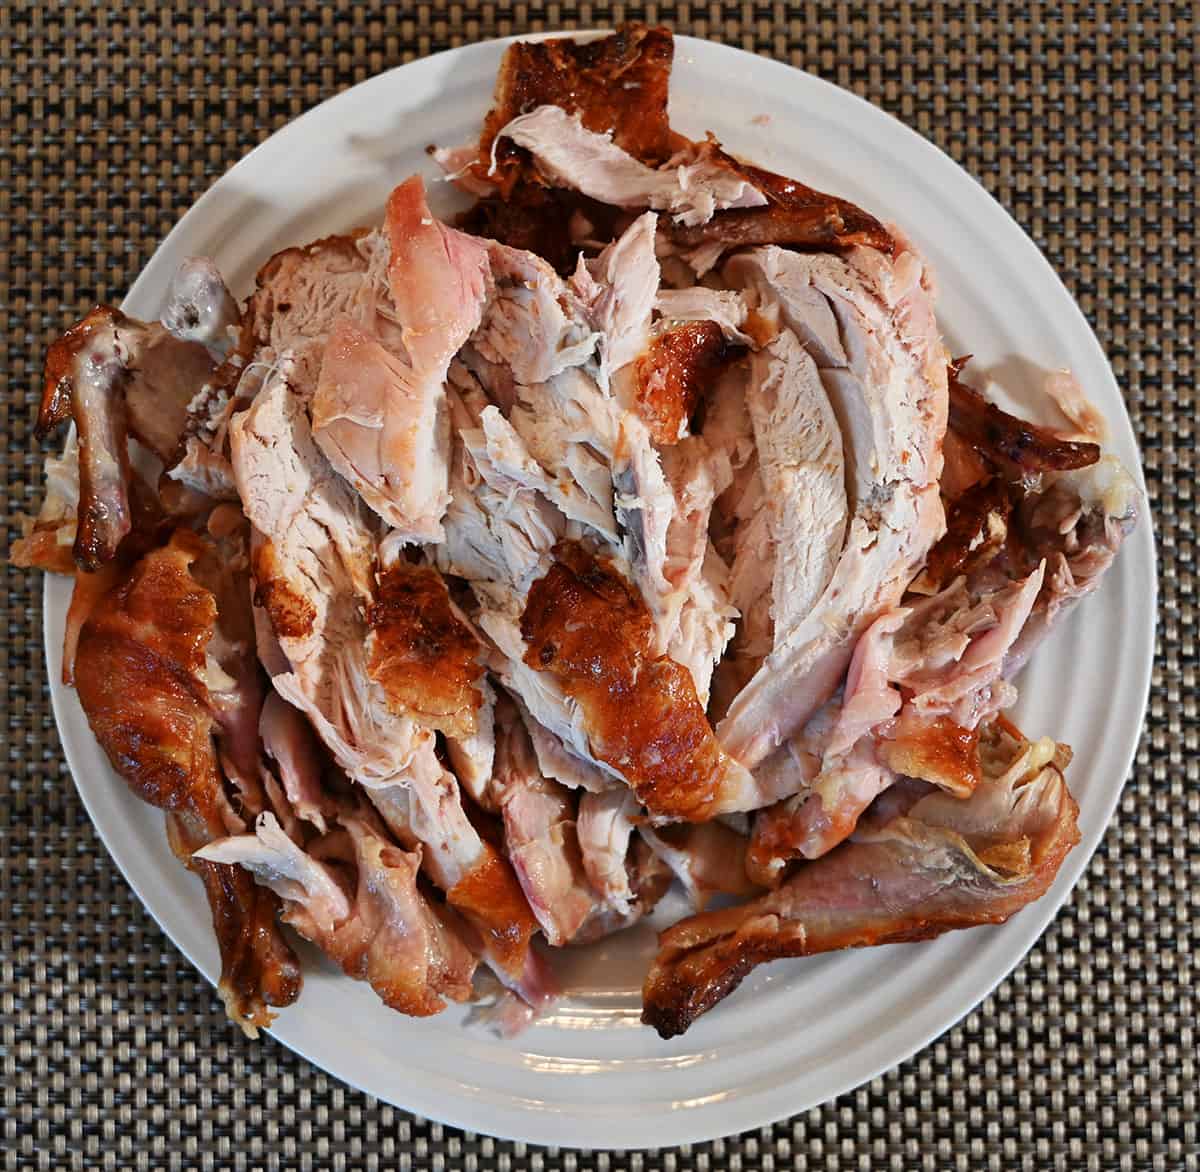 Image of the rotisserie chicken all cut up and served on a white plate, top down image.